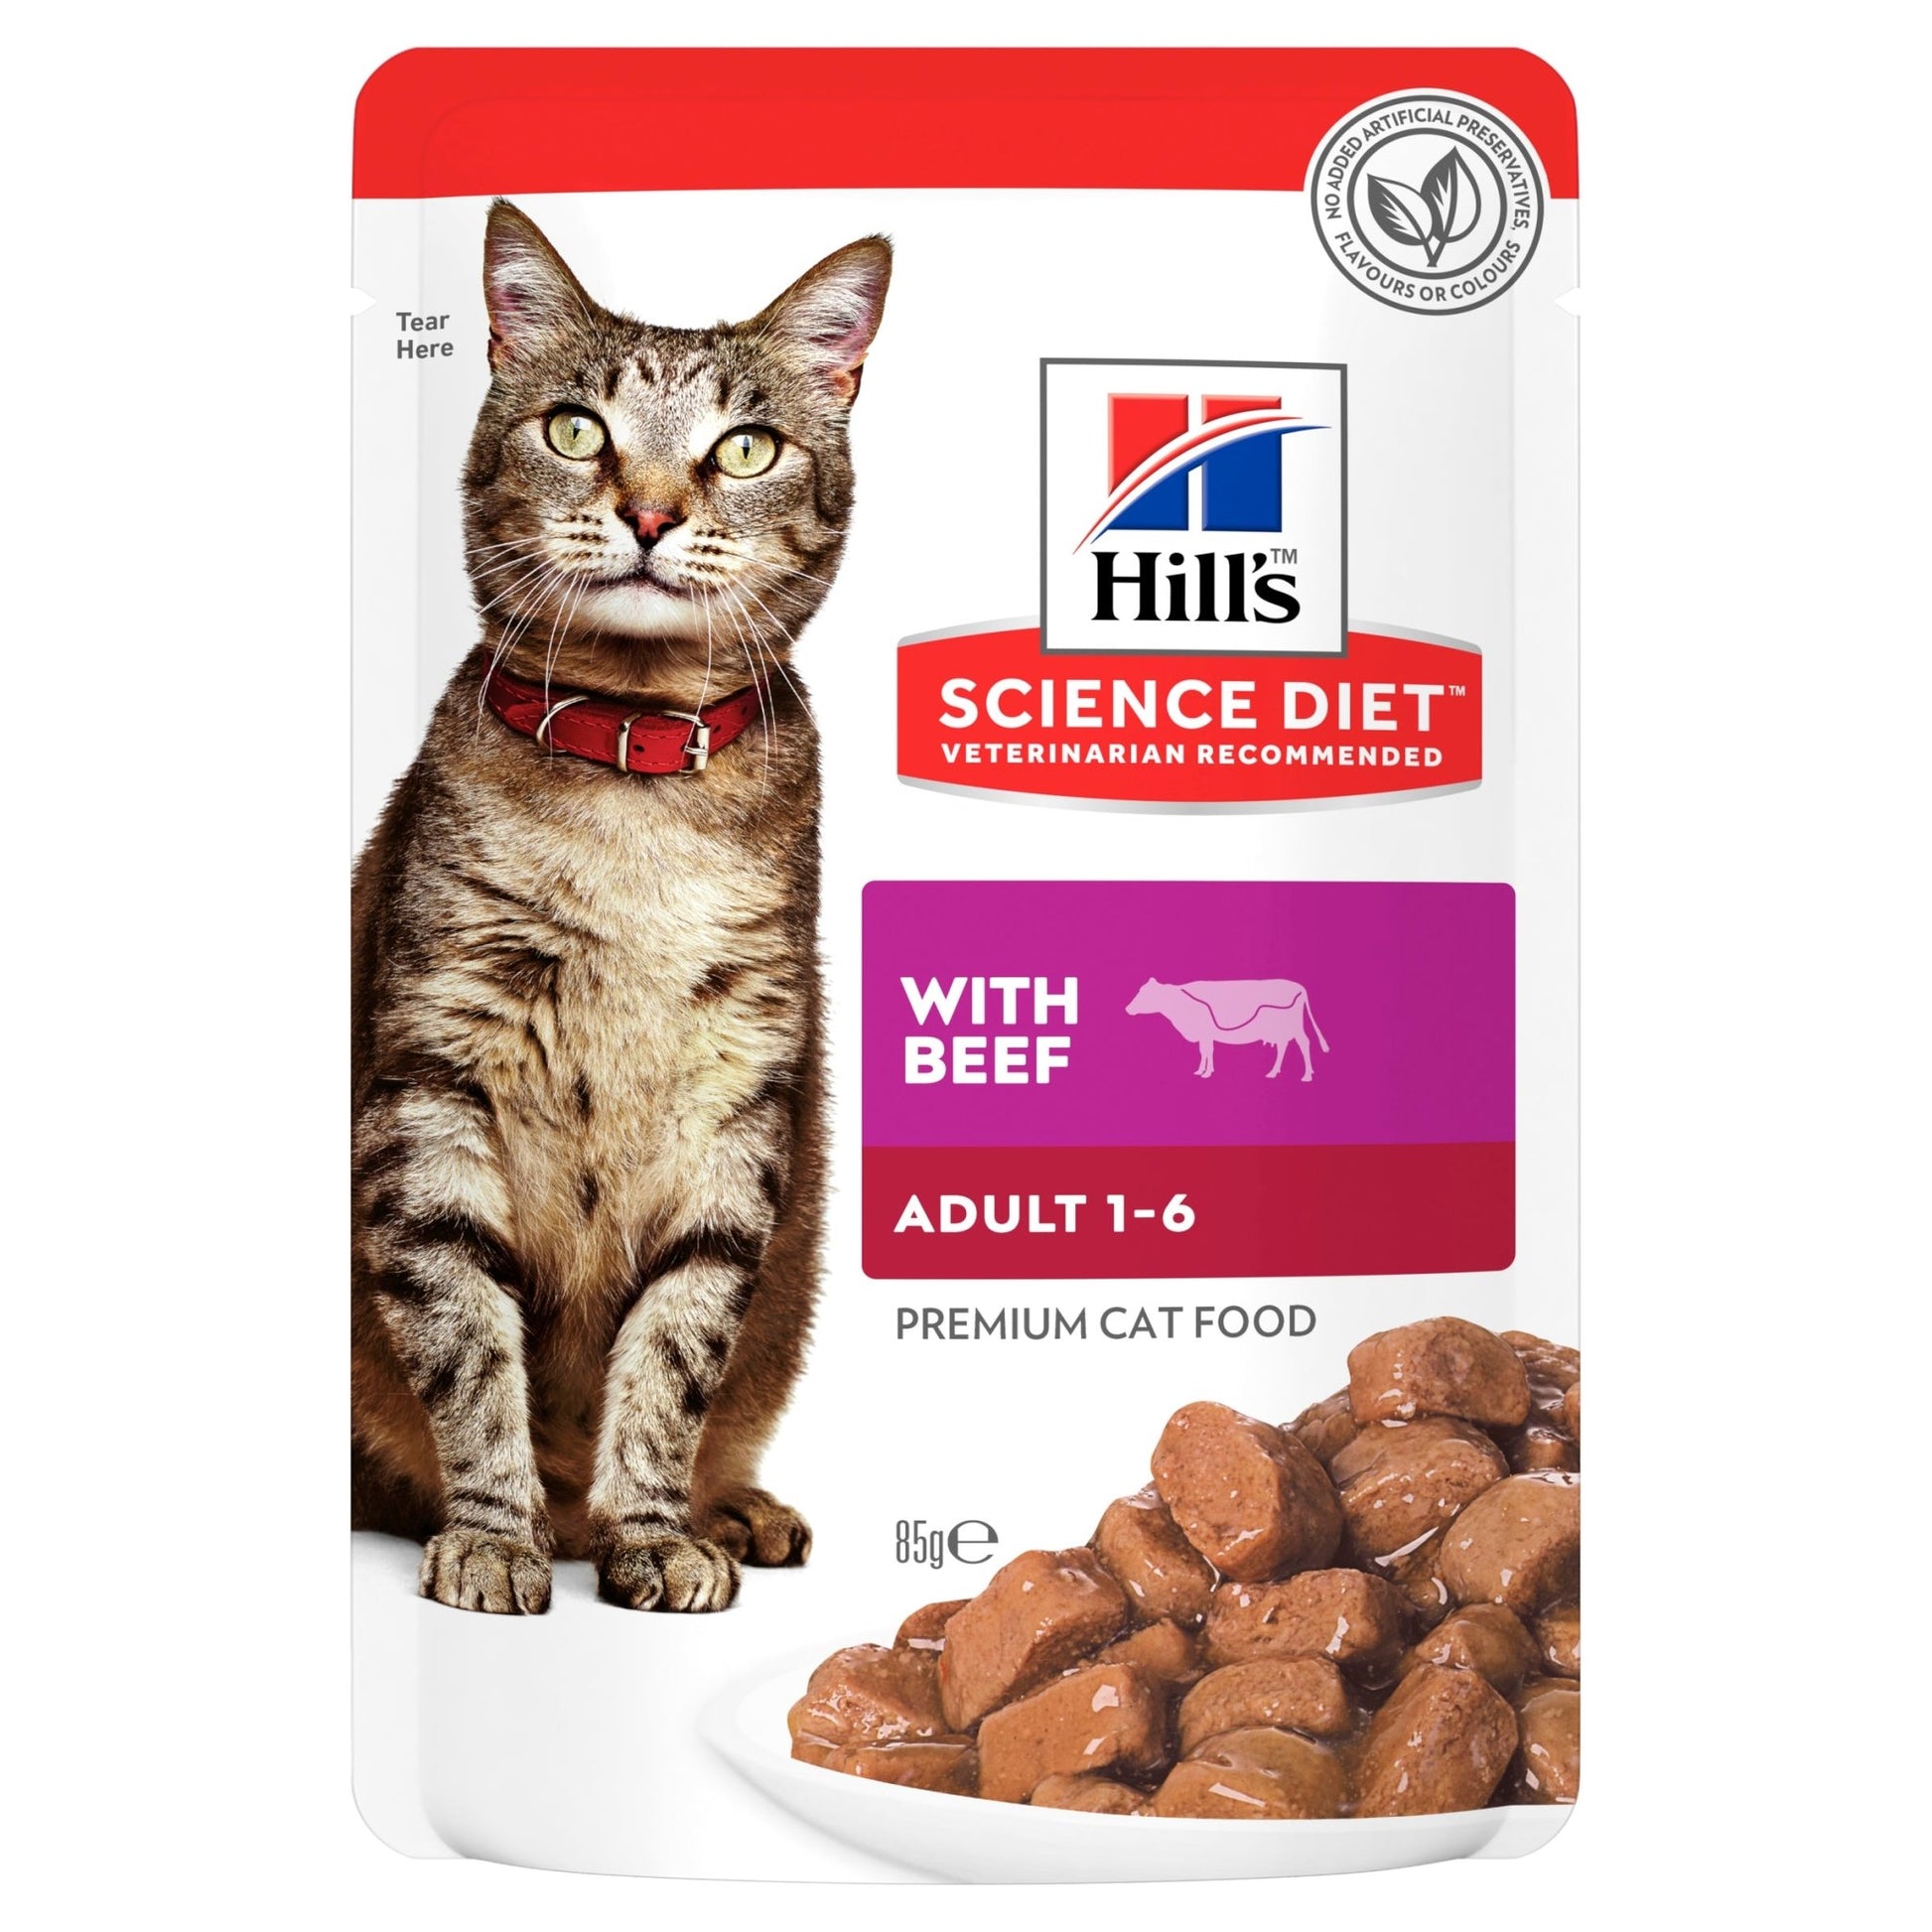 Hill's Science Diet Adult Optimal Care Beef Cat Food pouches 12x85g - Woonona Petfood & Produce